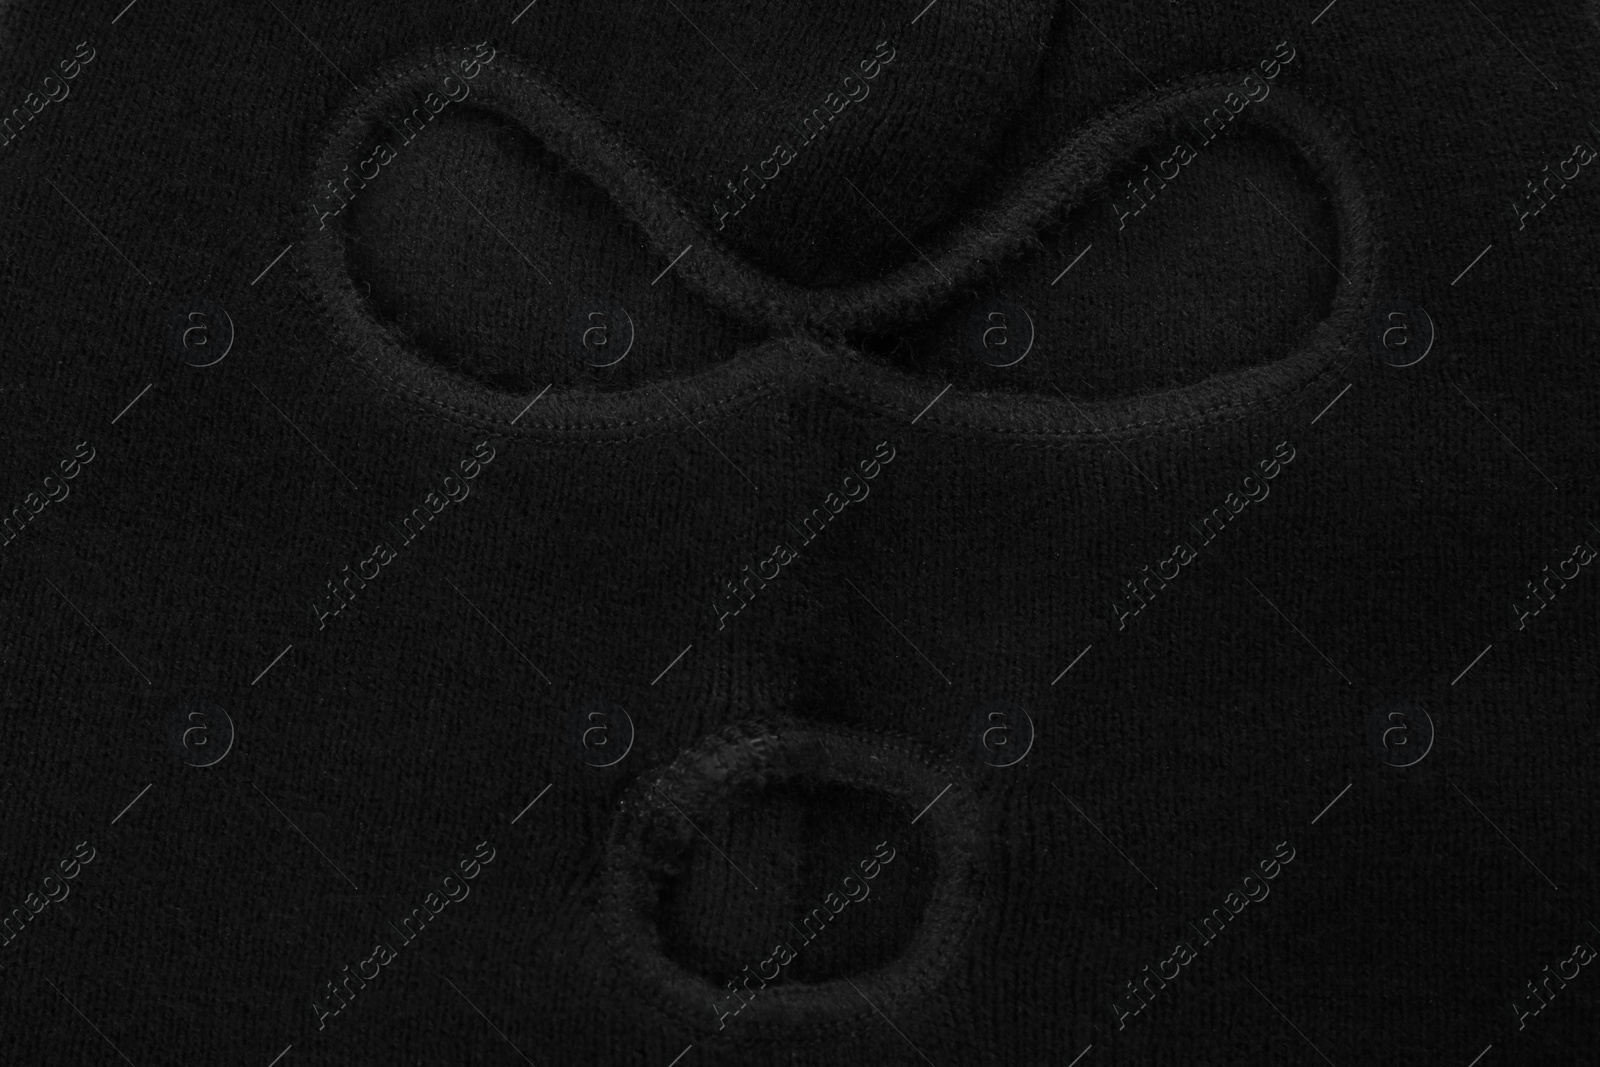 Photo of Black knitted balaclava as background, closeup view